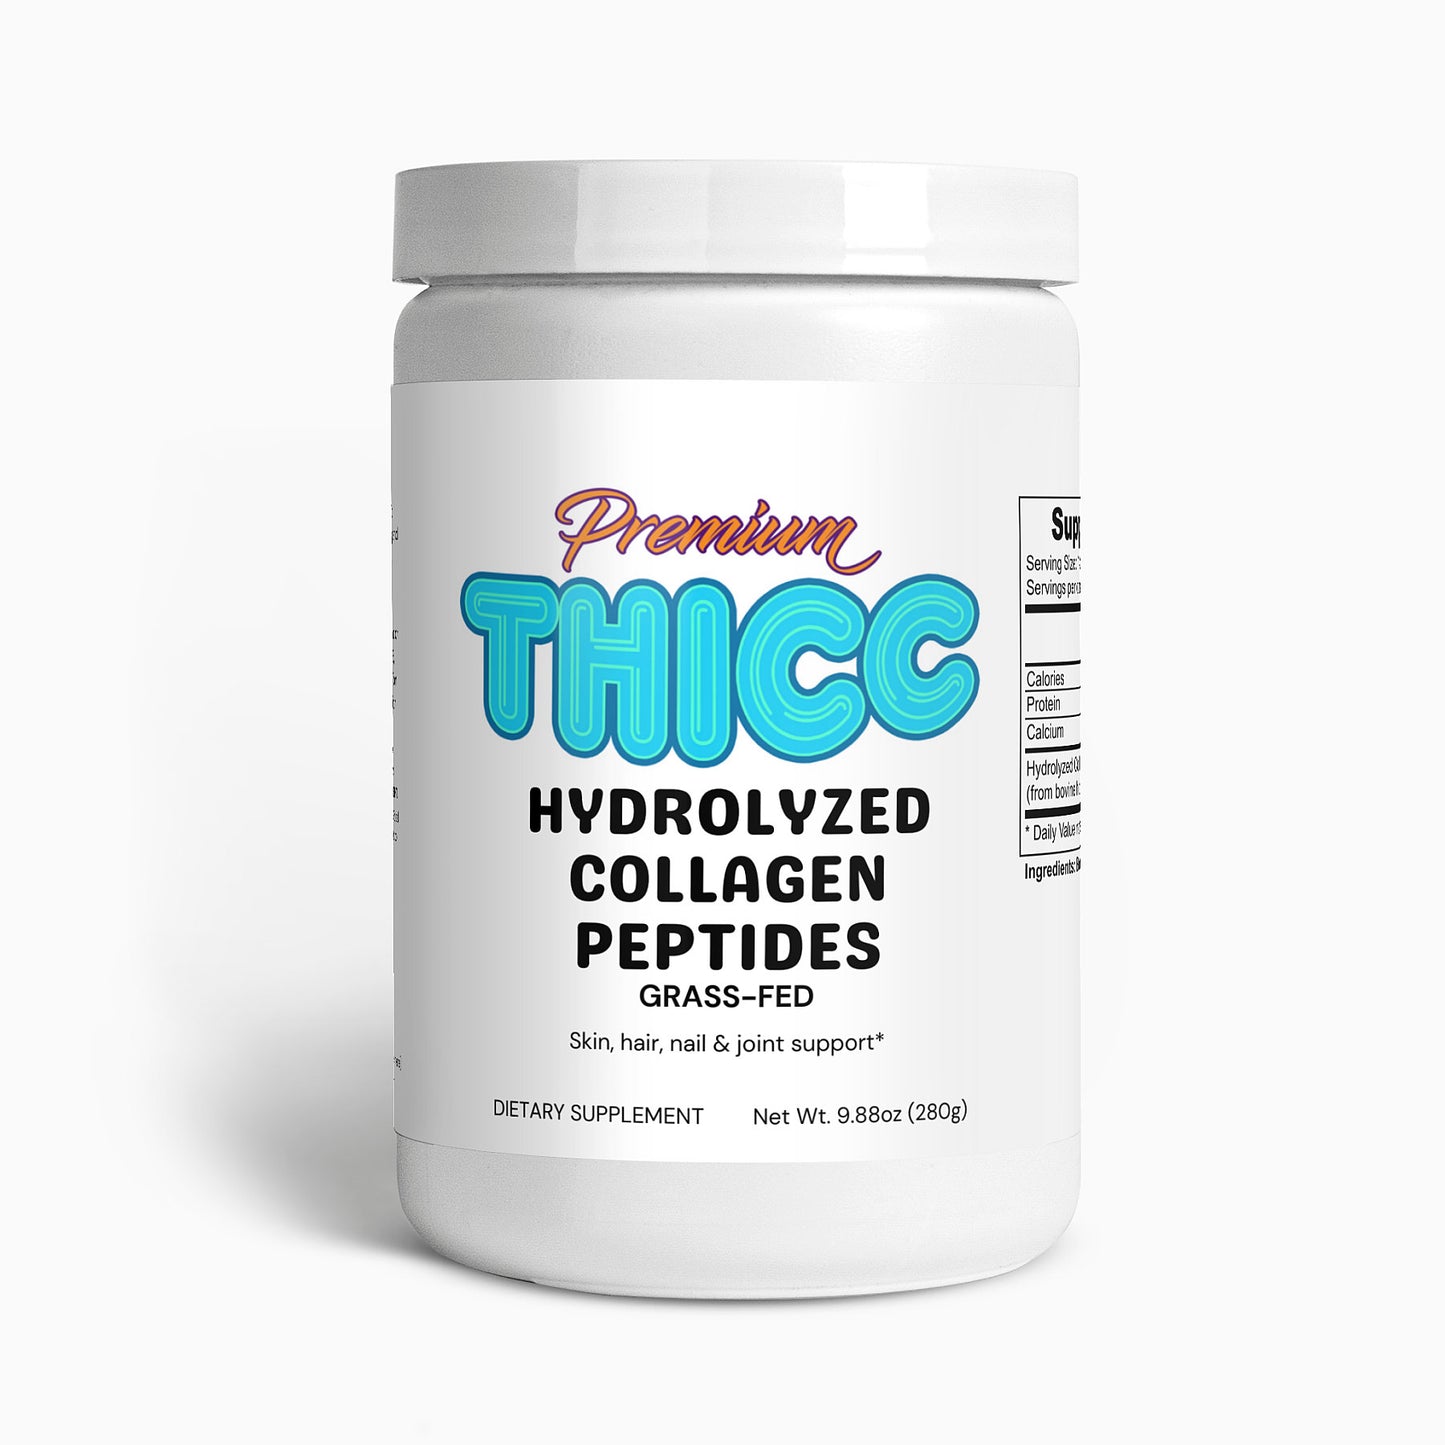 Premium Thicc Grass-Fed Hydrolyzed Collagen Peptides